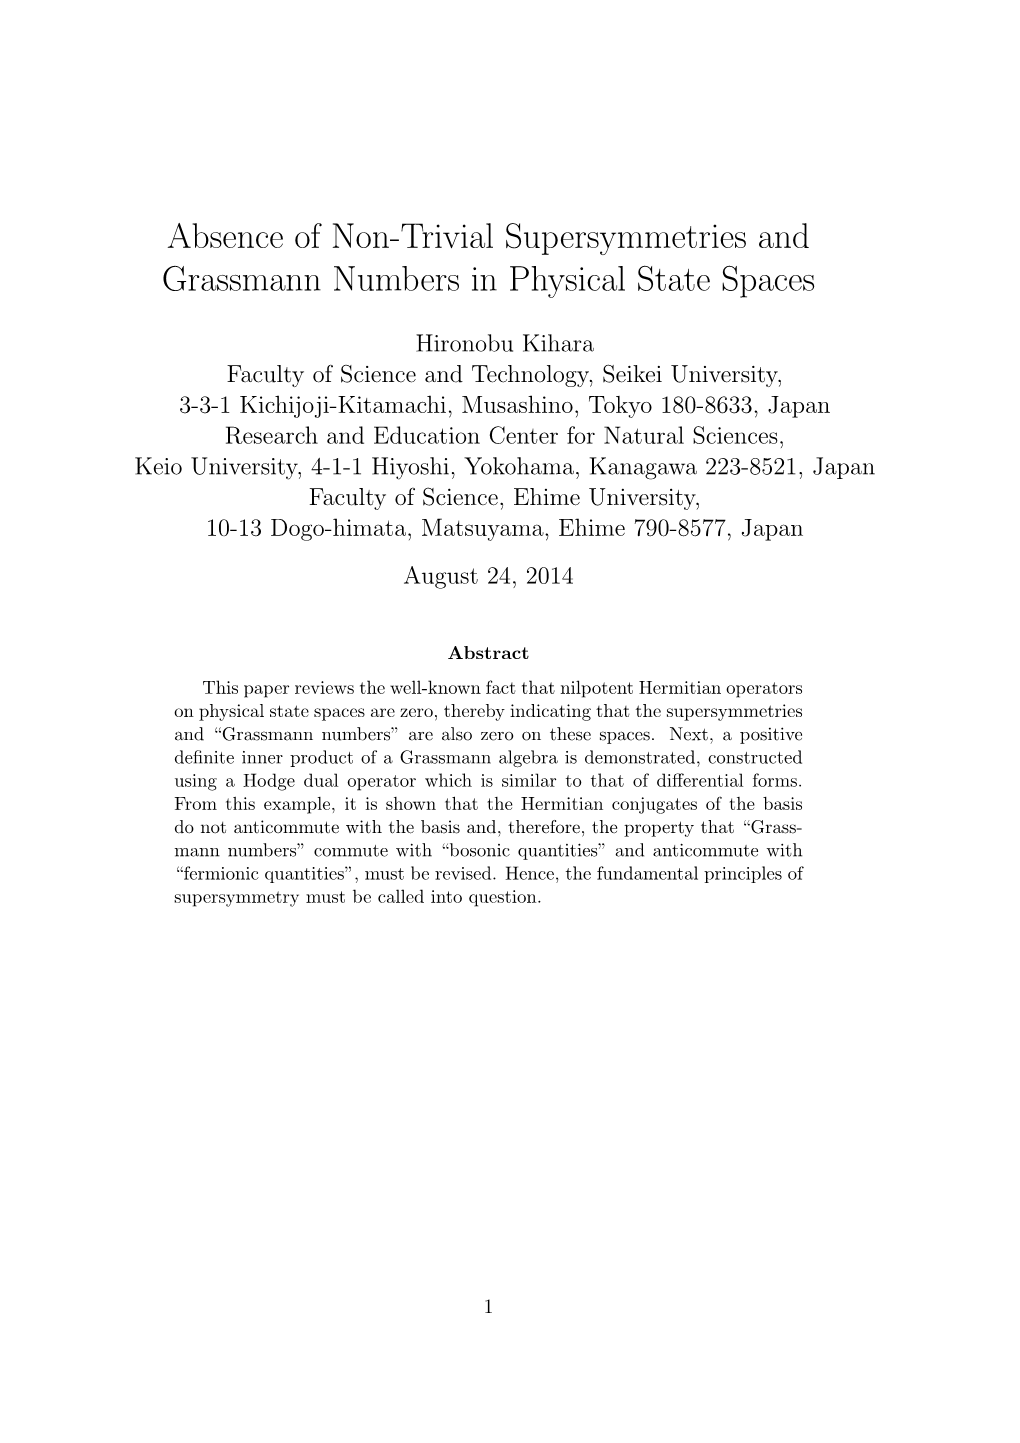 Absence of Non-Trivial Supersymmetries and Grassmann Numbers in Physical State Spaces